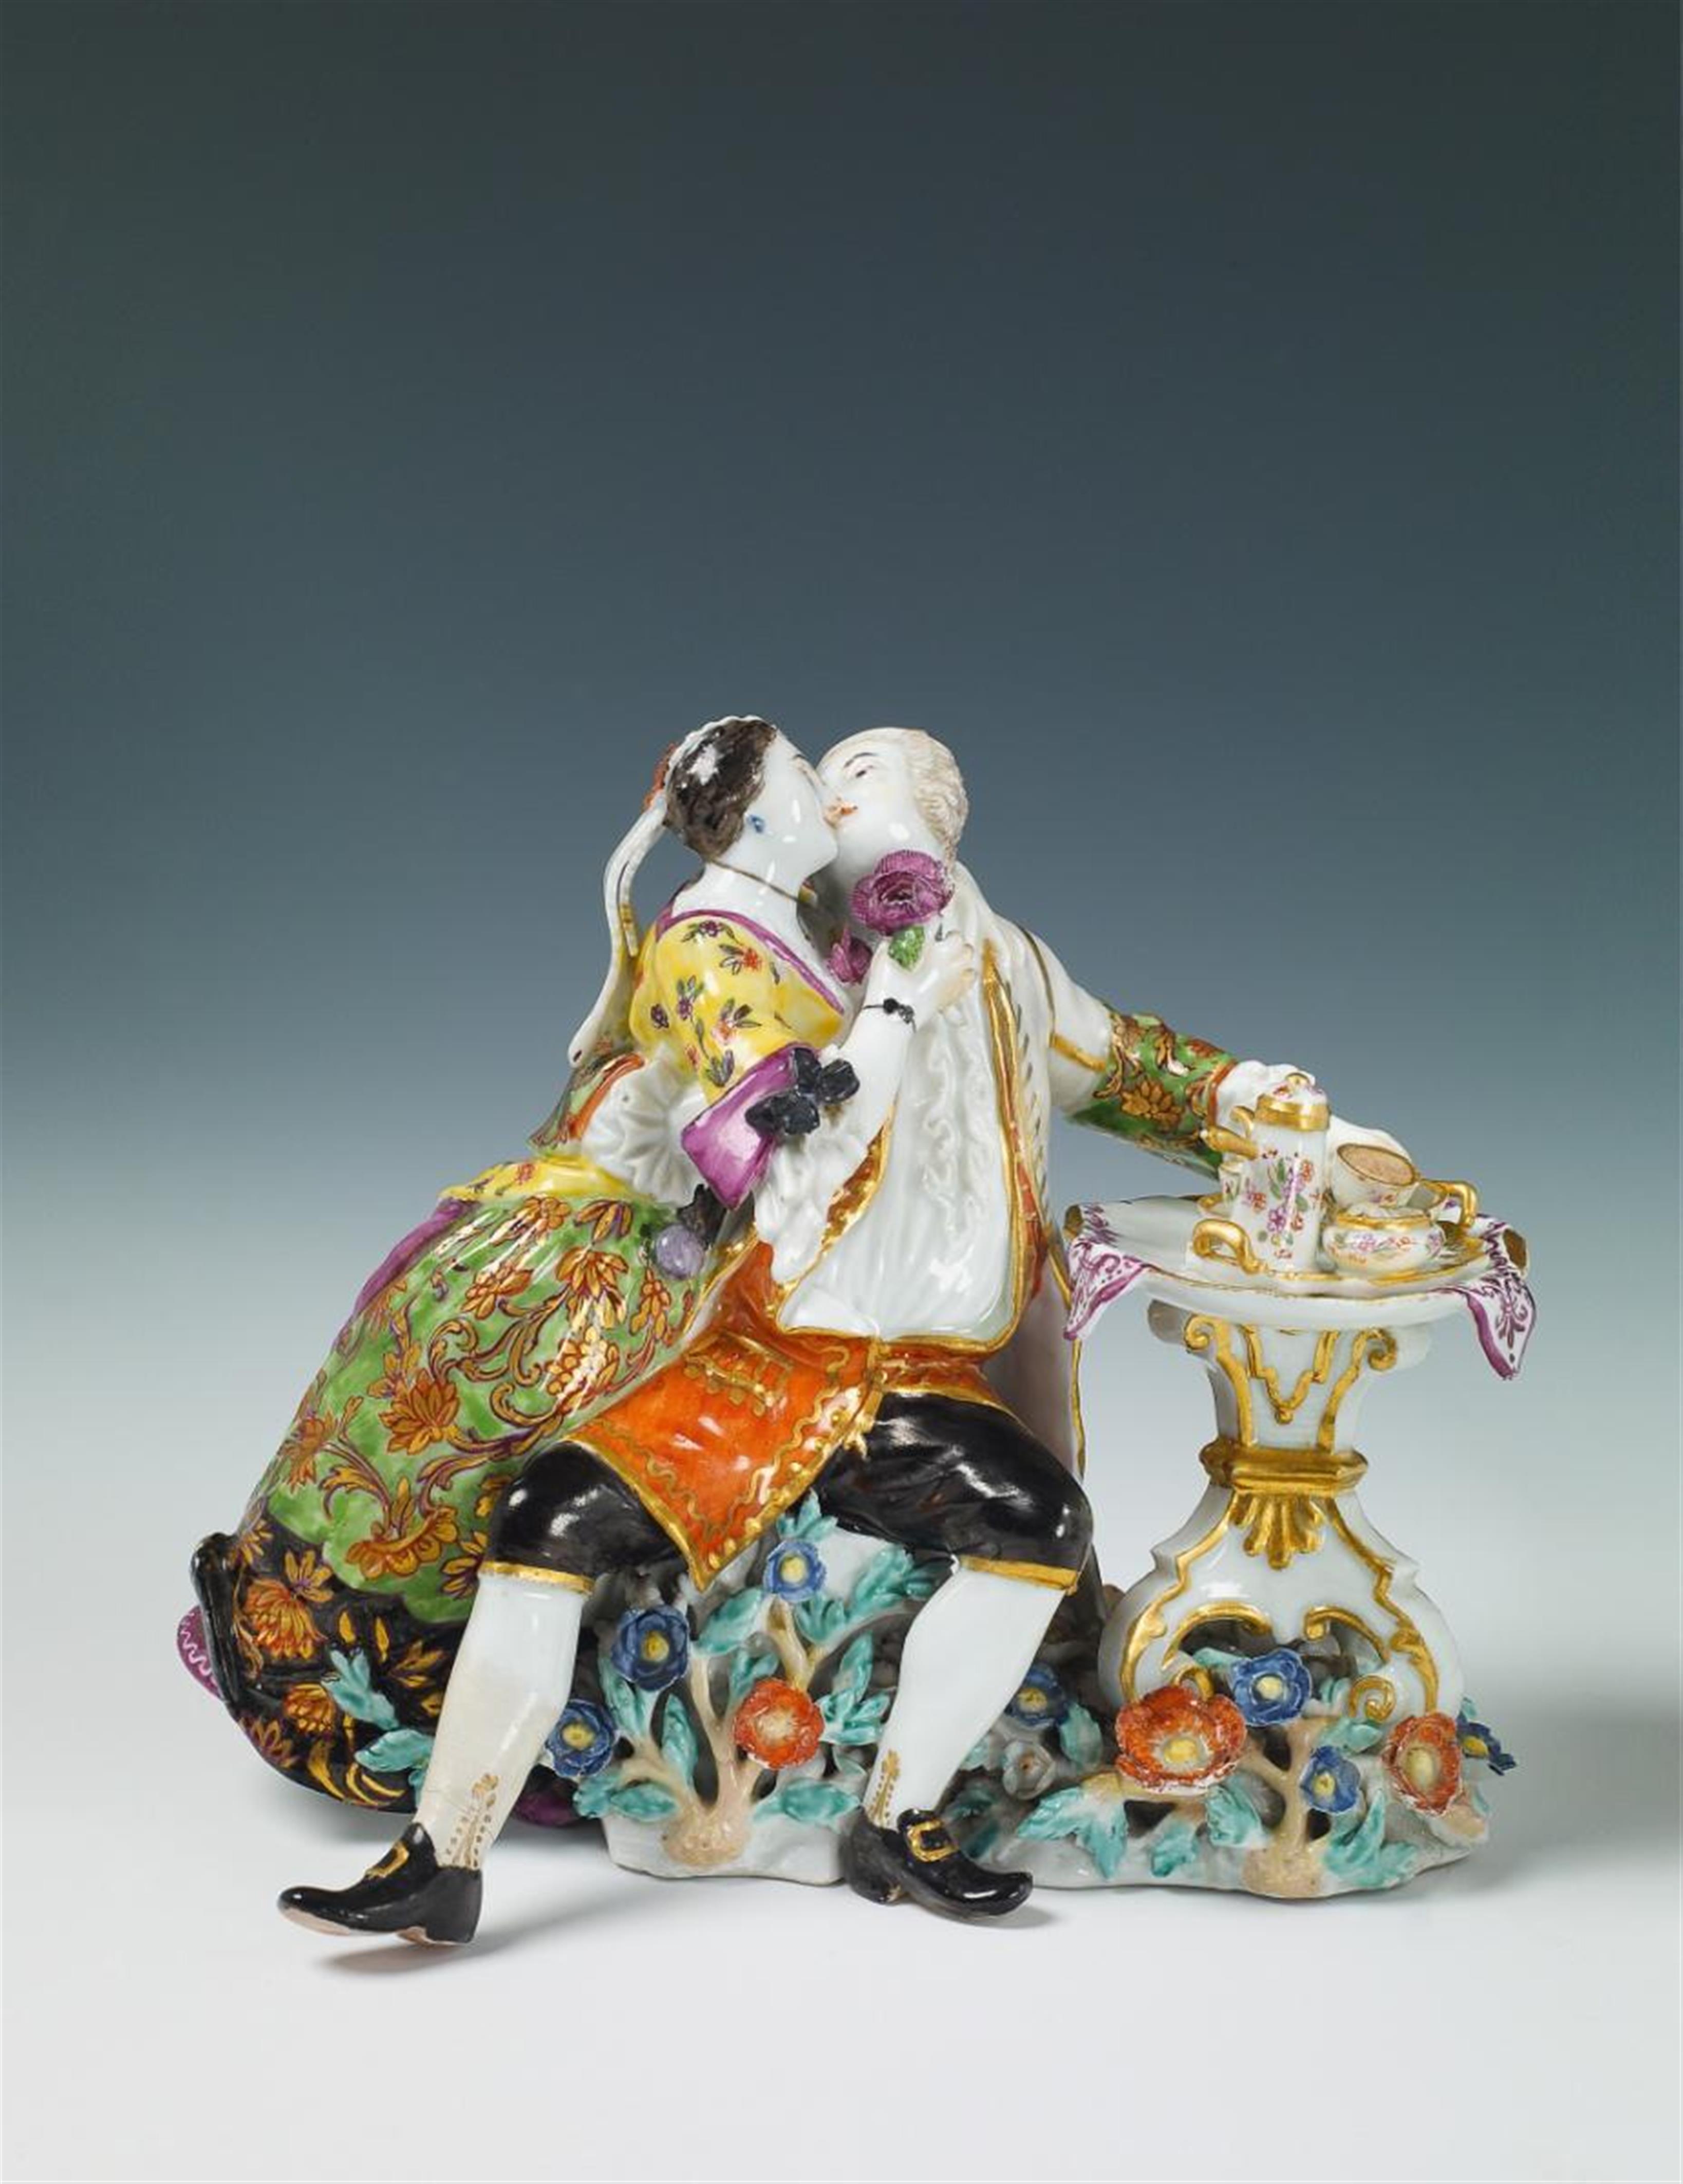 A rare Meissen group showing a finely dressed couple enjoying hot chocolate at a table on a floral base. Liebespaar bei der Schokolade - image-1